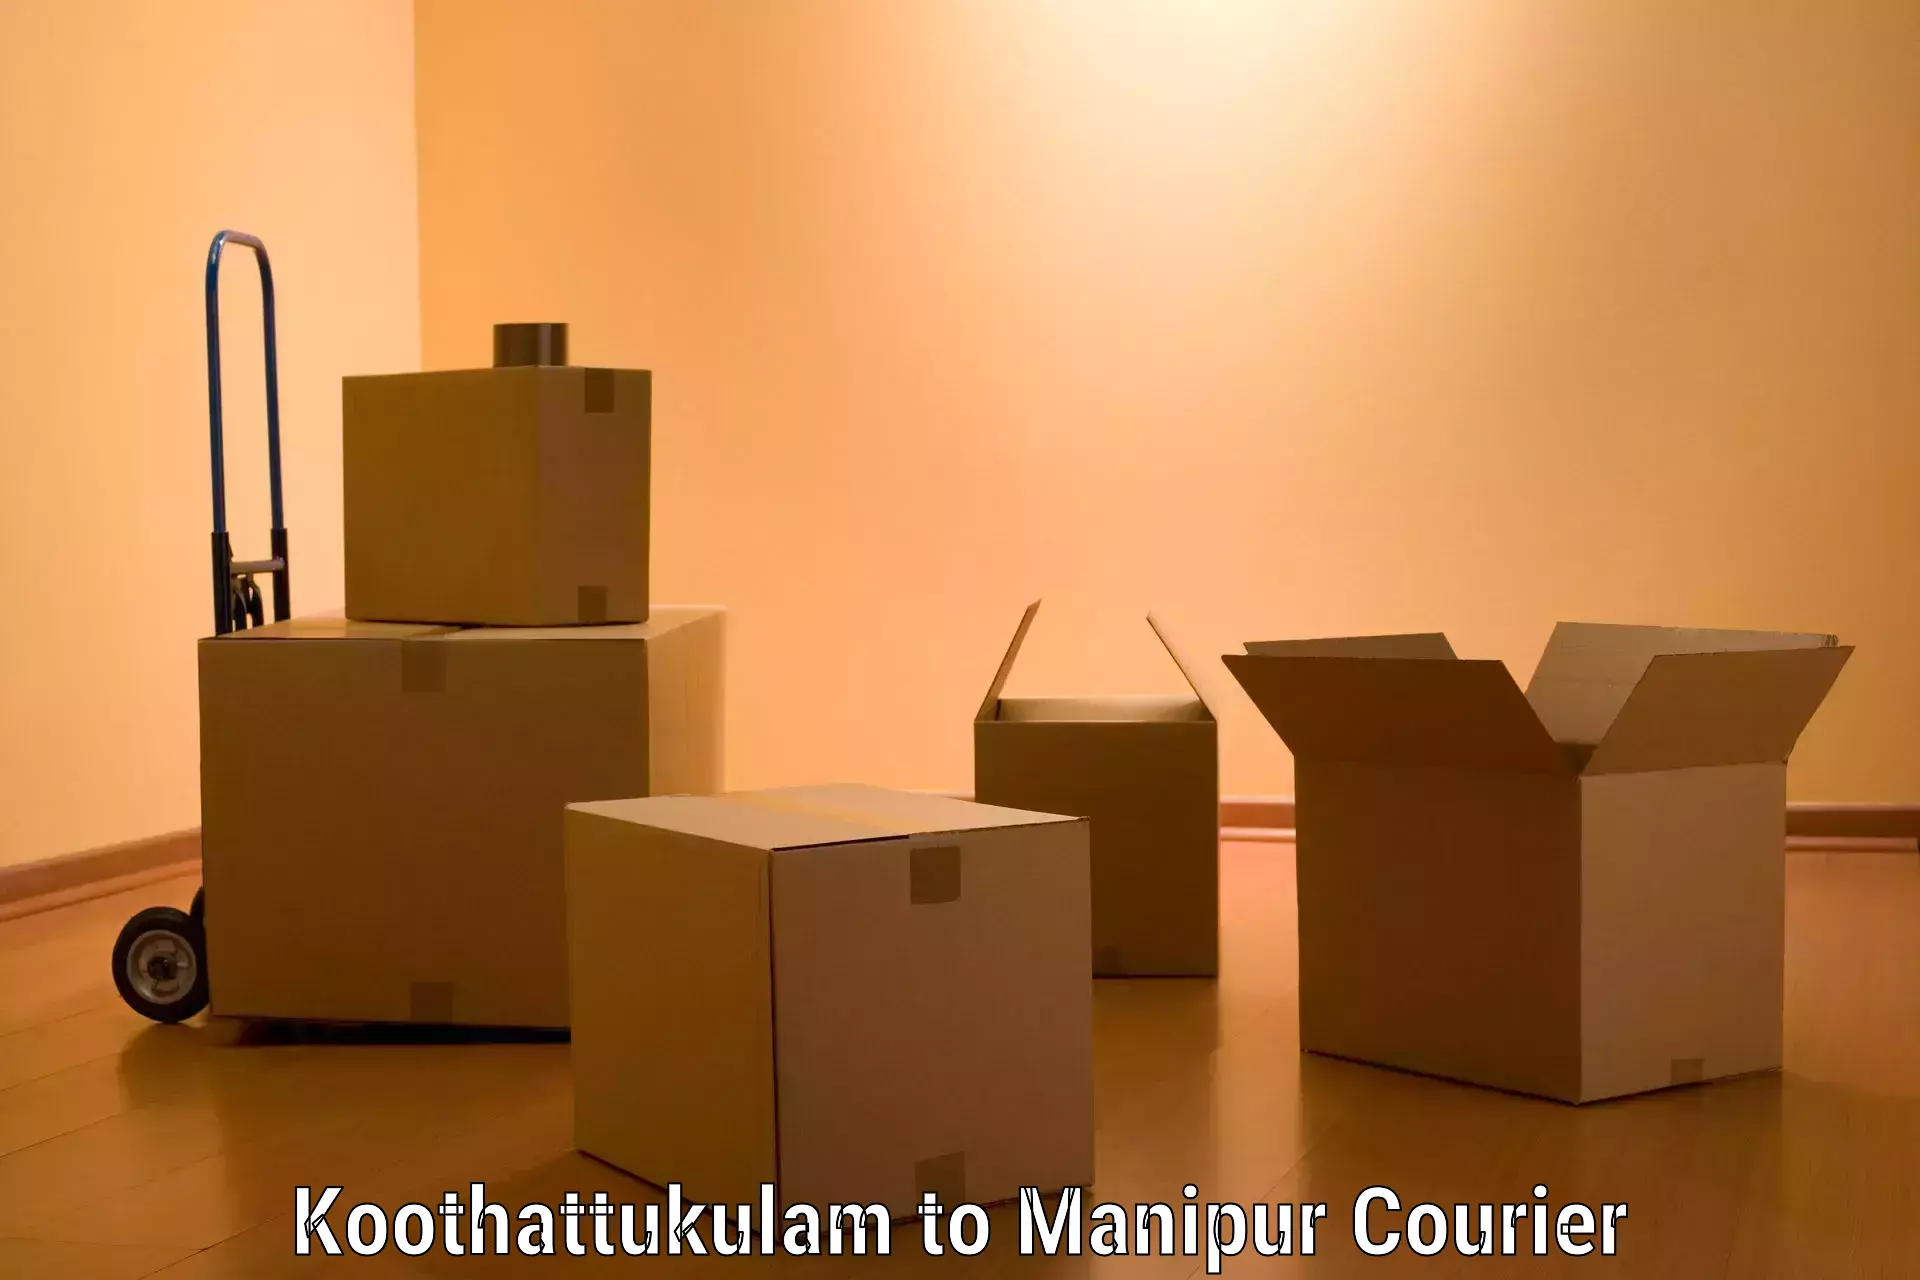 Professional packing services in Koothattukulam to Manipur